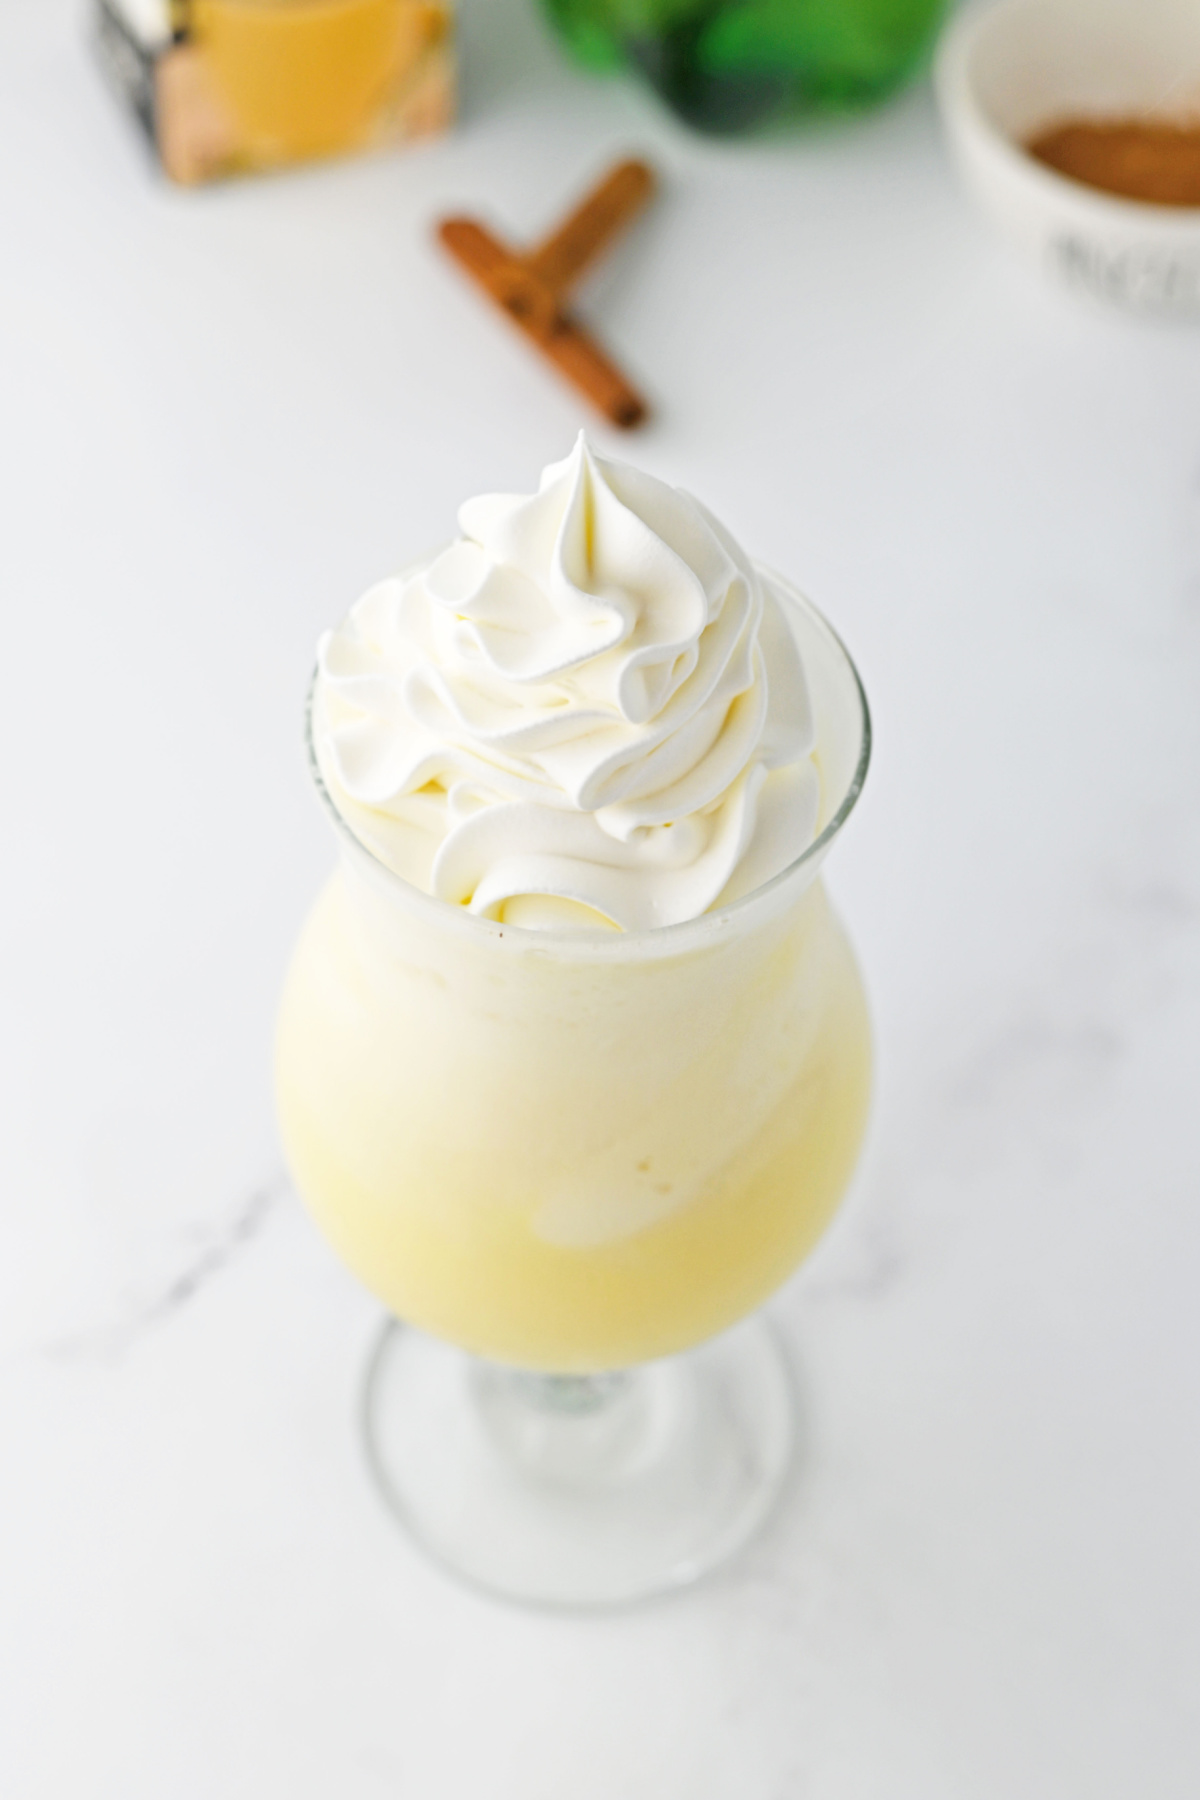 An eggnog float with whipped cream and a cinnamon stick.